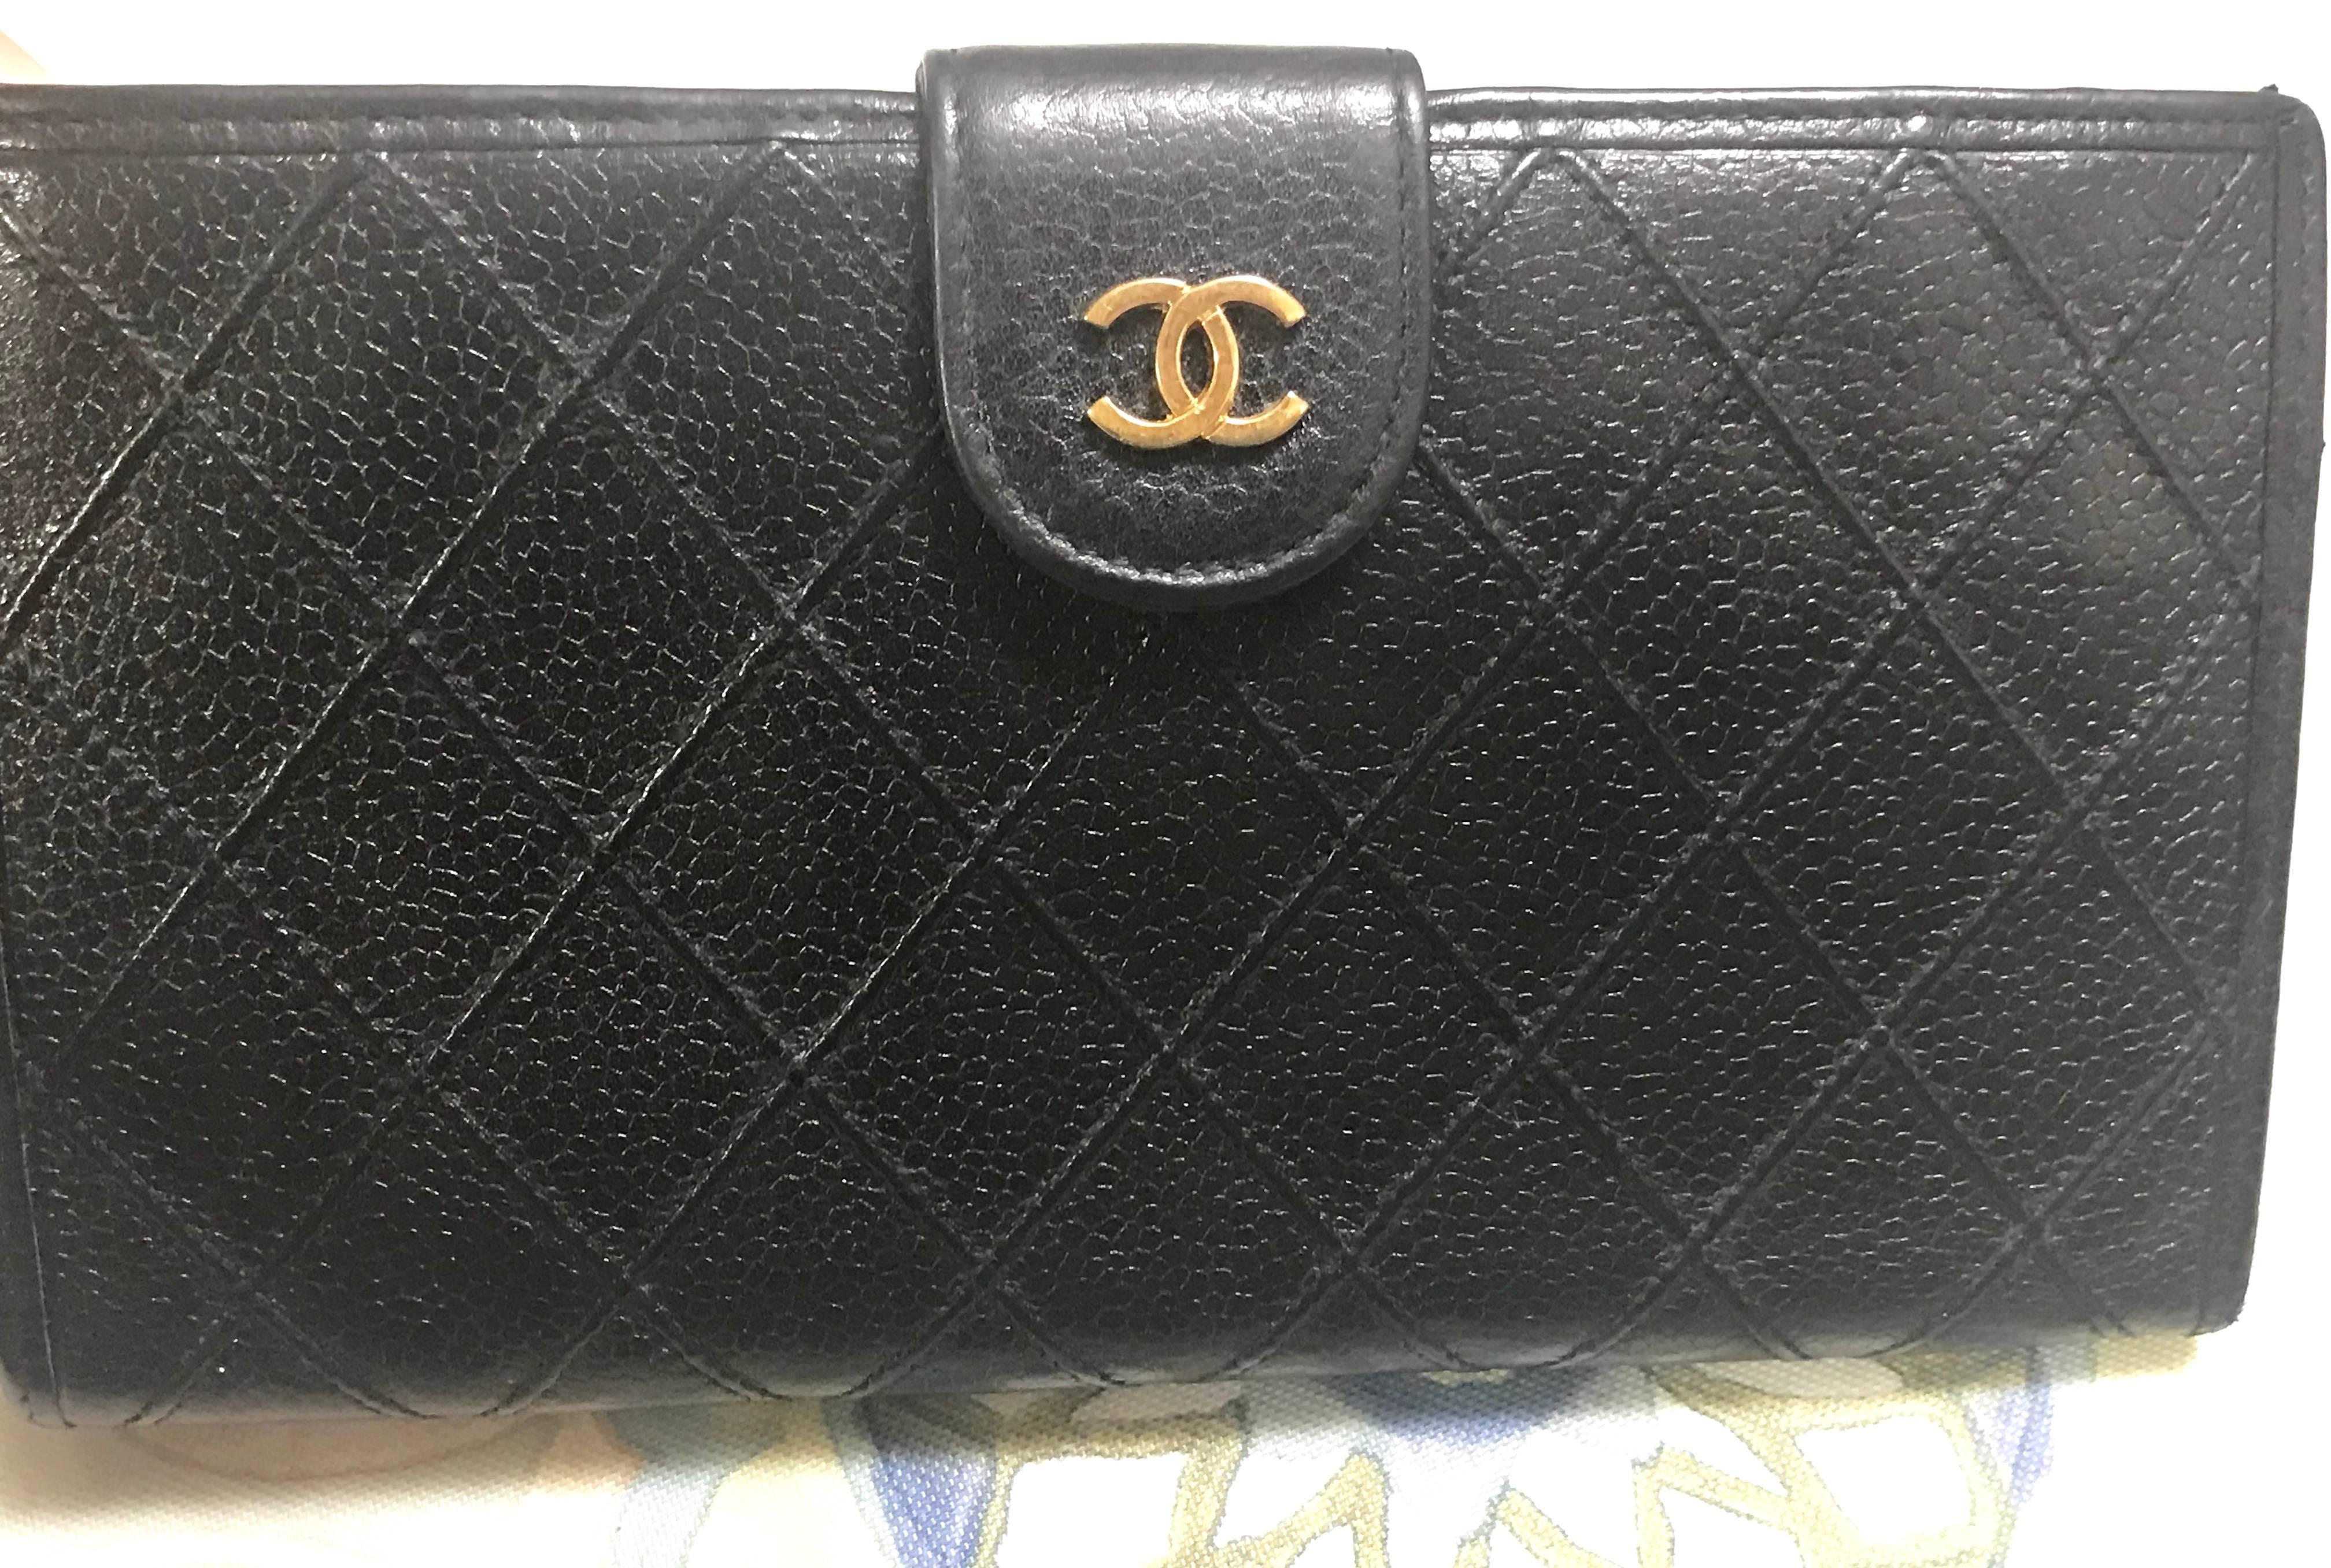 1990s. Vintage CHANEL black caviar leather wallet with stitches and gold tone CC motif. Perfect gift.

This is a CHANEL vintage wallet in black caviar leather from the 90's. 
Very sophisticated looking and something that would never go out of